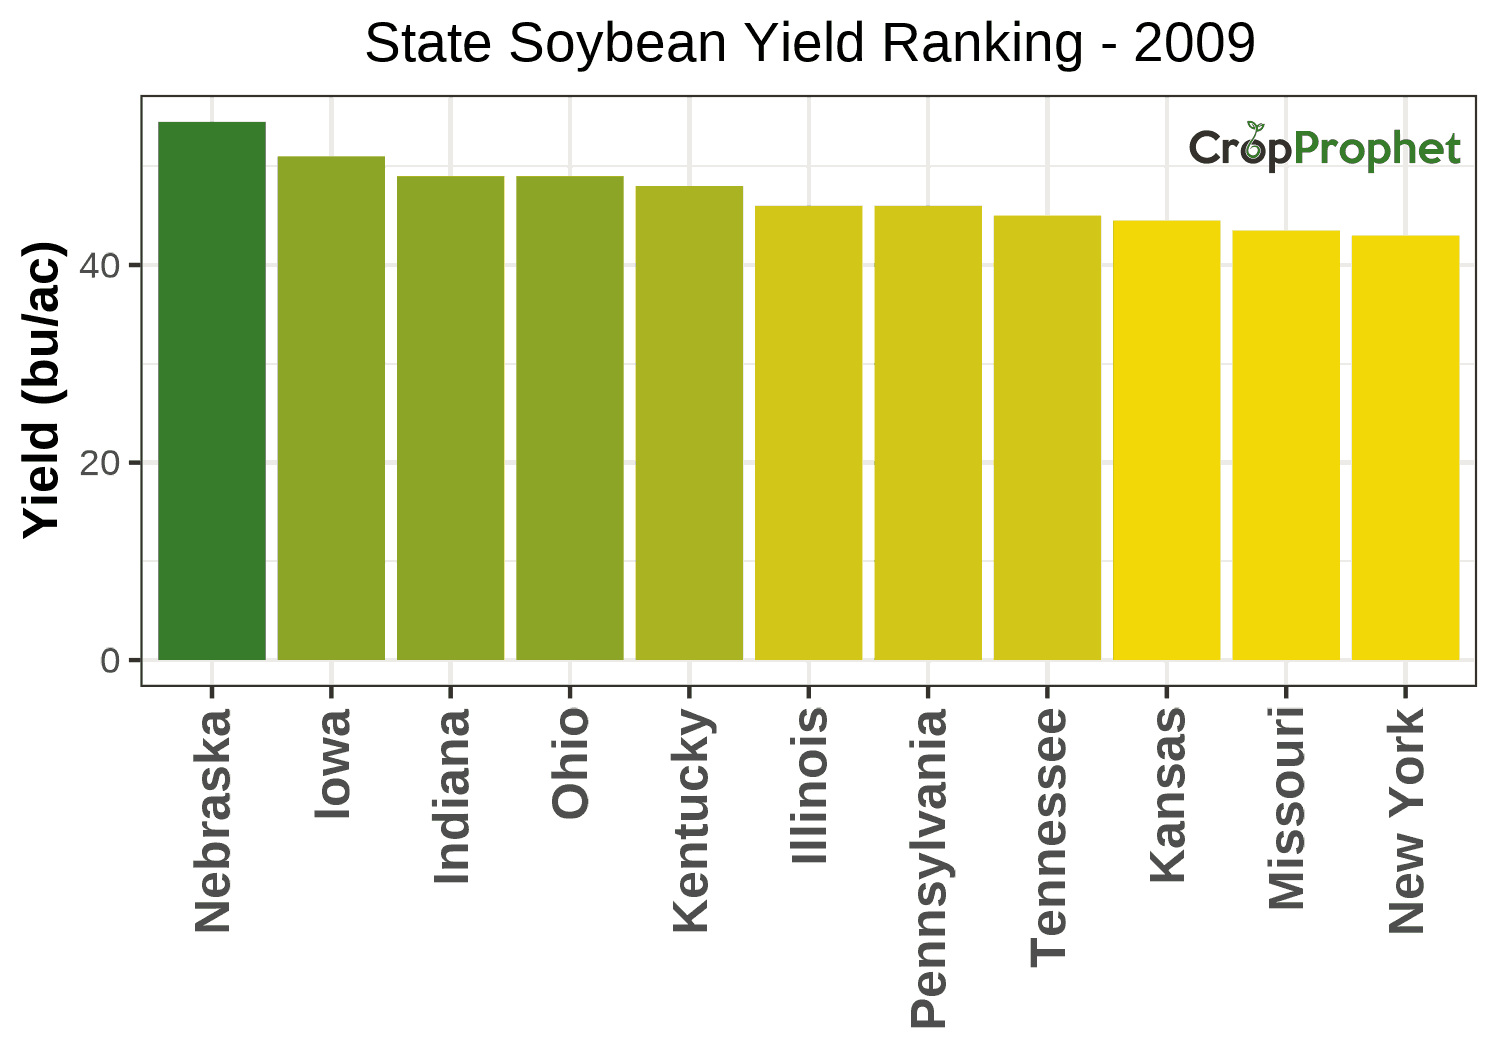 Soybean Production by State - 2009 Rankings